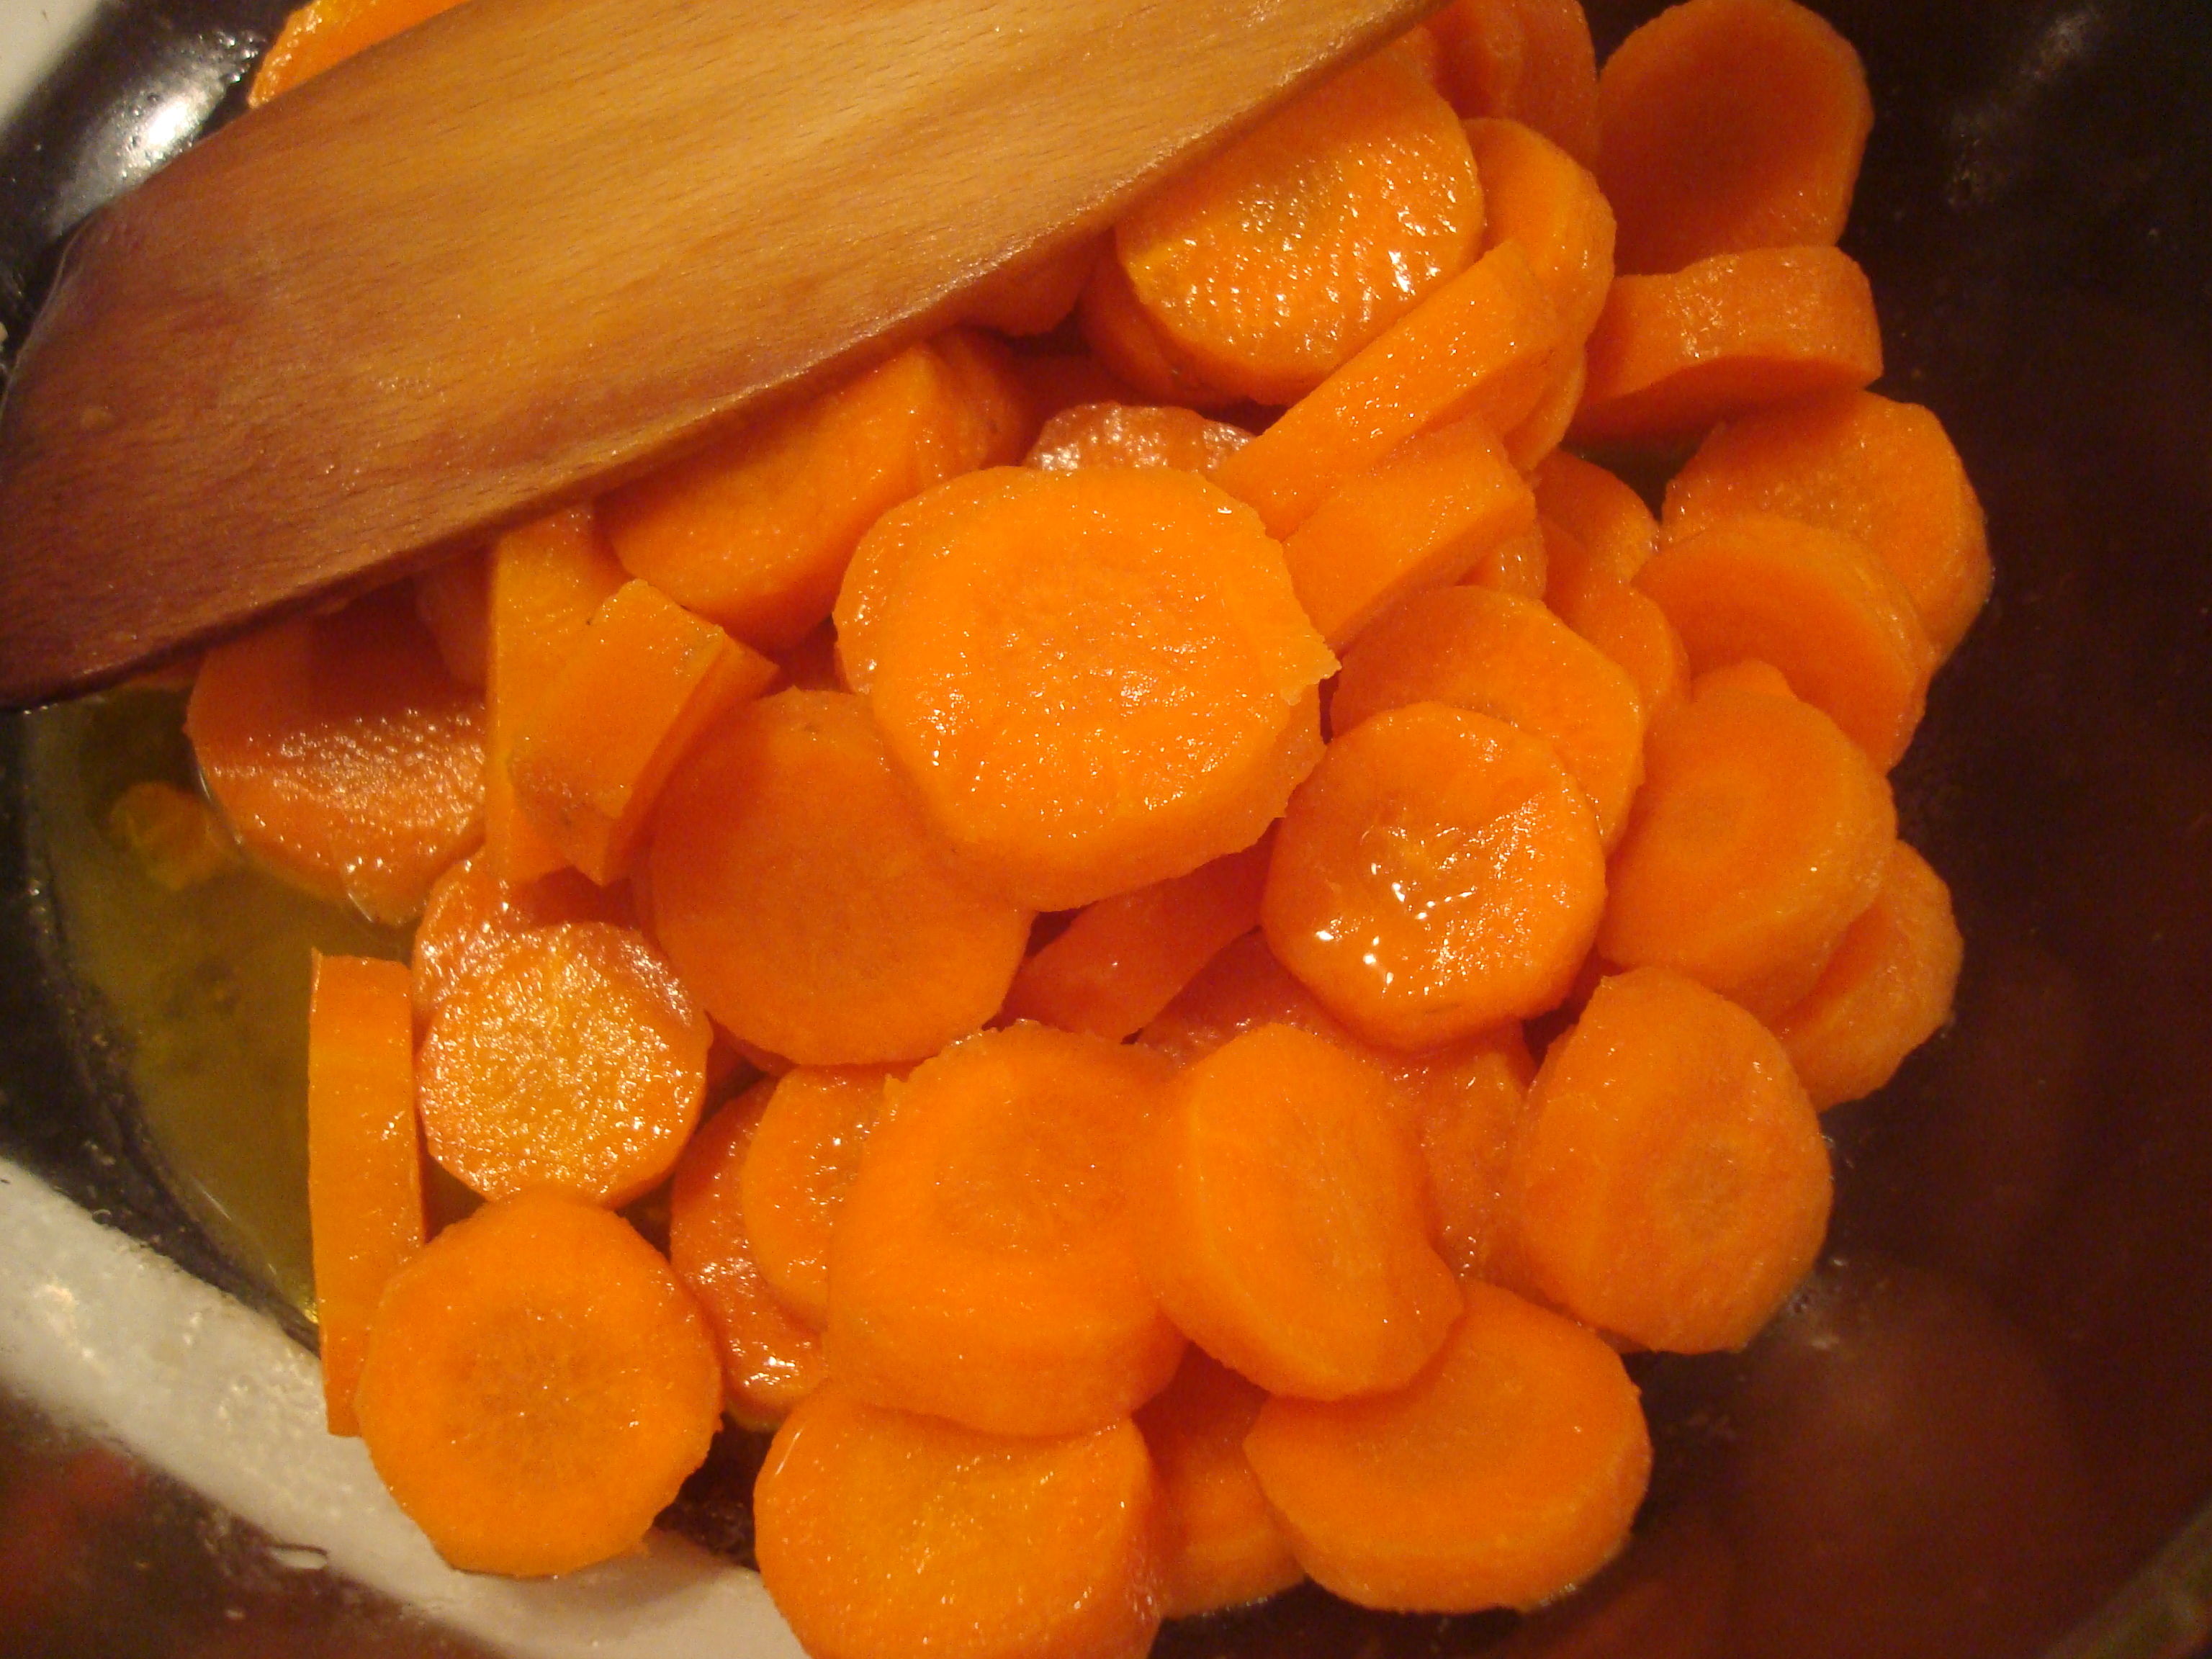 Cooking carrots photo